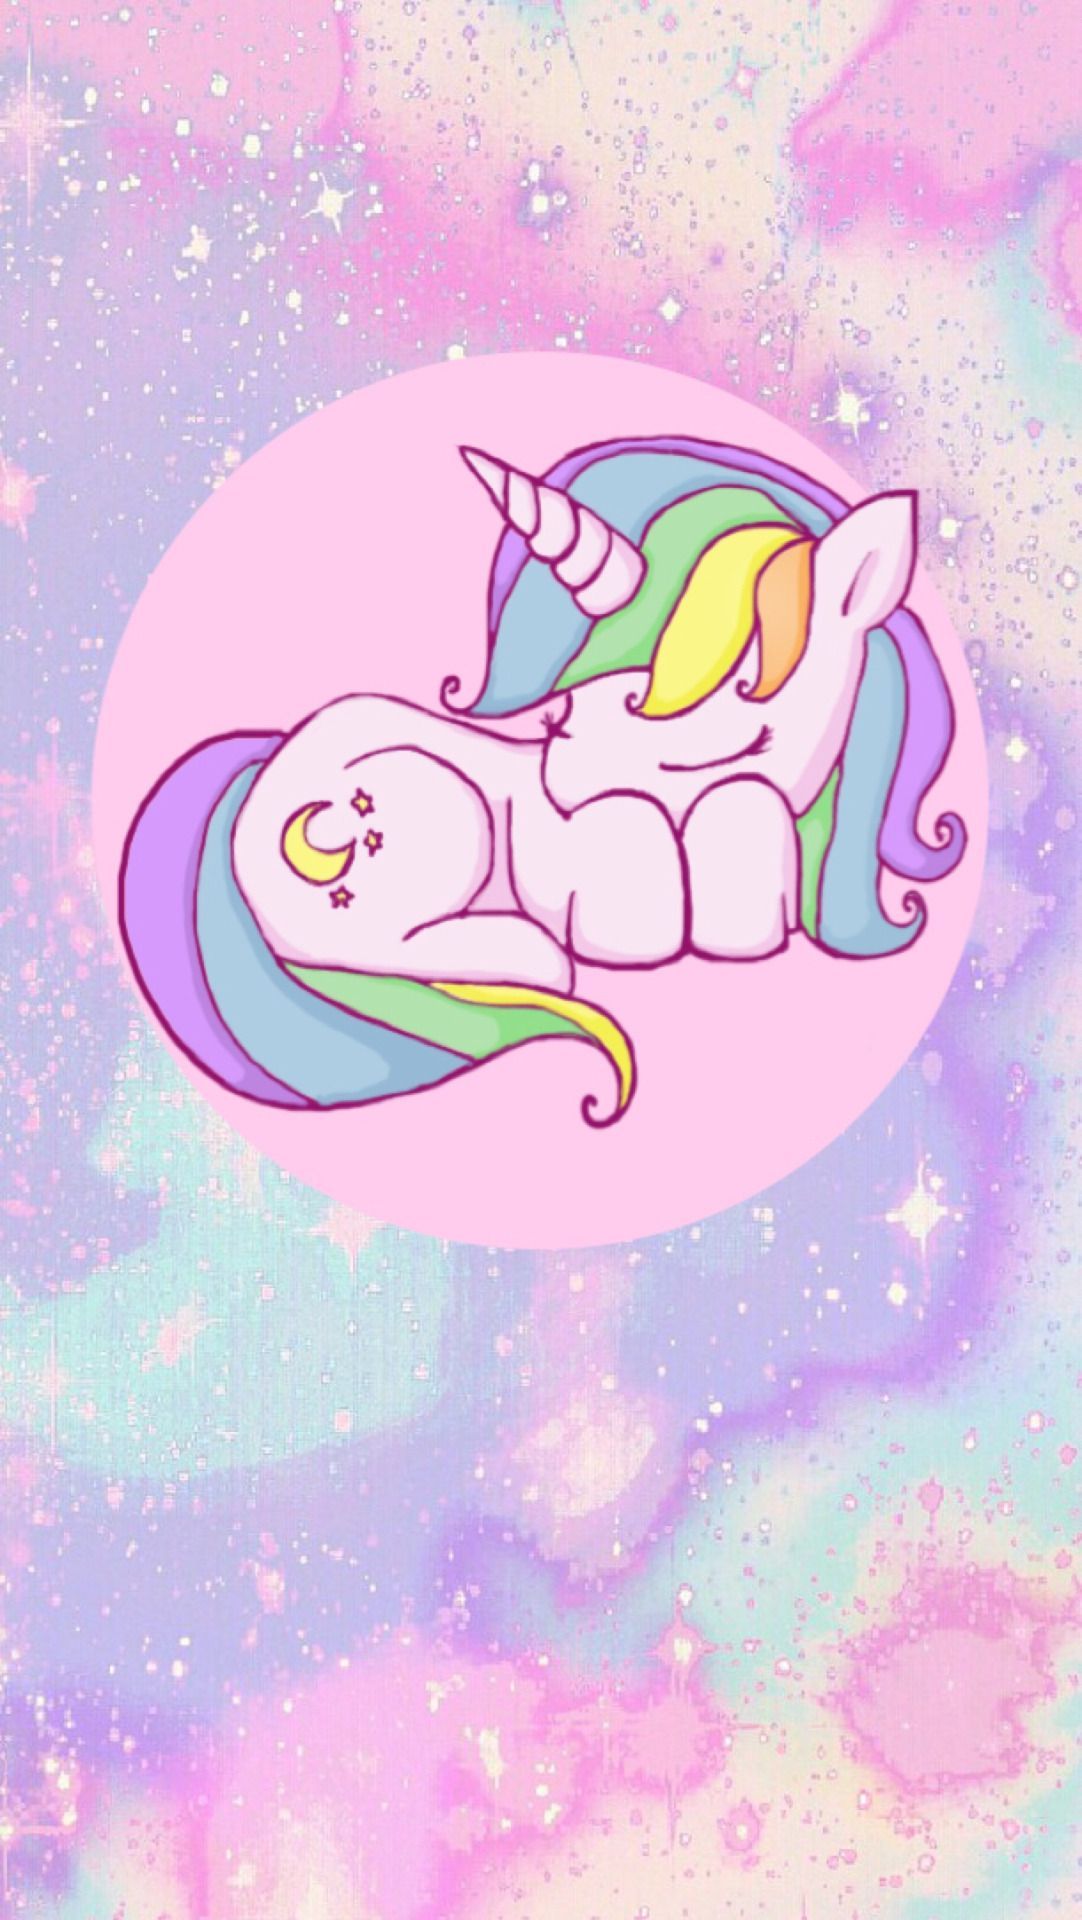 IPhone Wallpaper Unicorn with high-resolution 1080x1920 pixel. You can use this wallpaper for your iPhone 5, 6, 7, 8, X, XS, XR backgrounds, Mobile Screensaver, or iPad Lock Screen - Unicorn